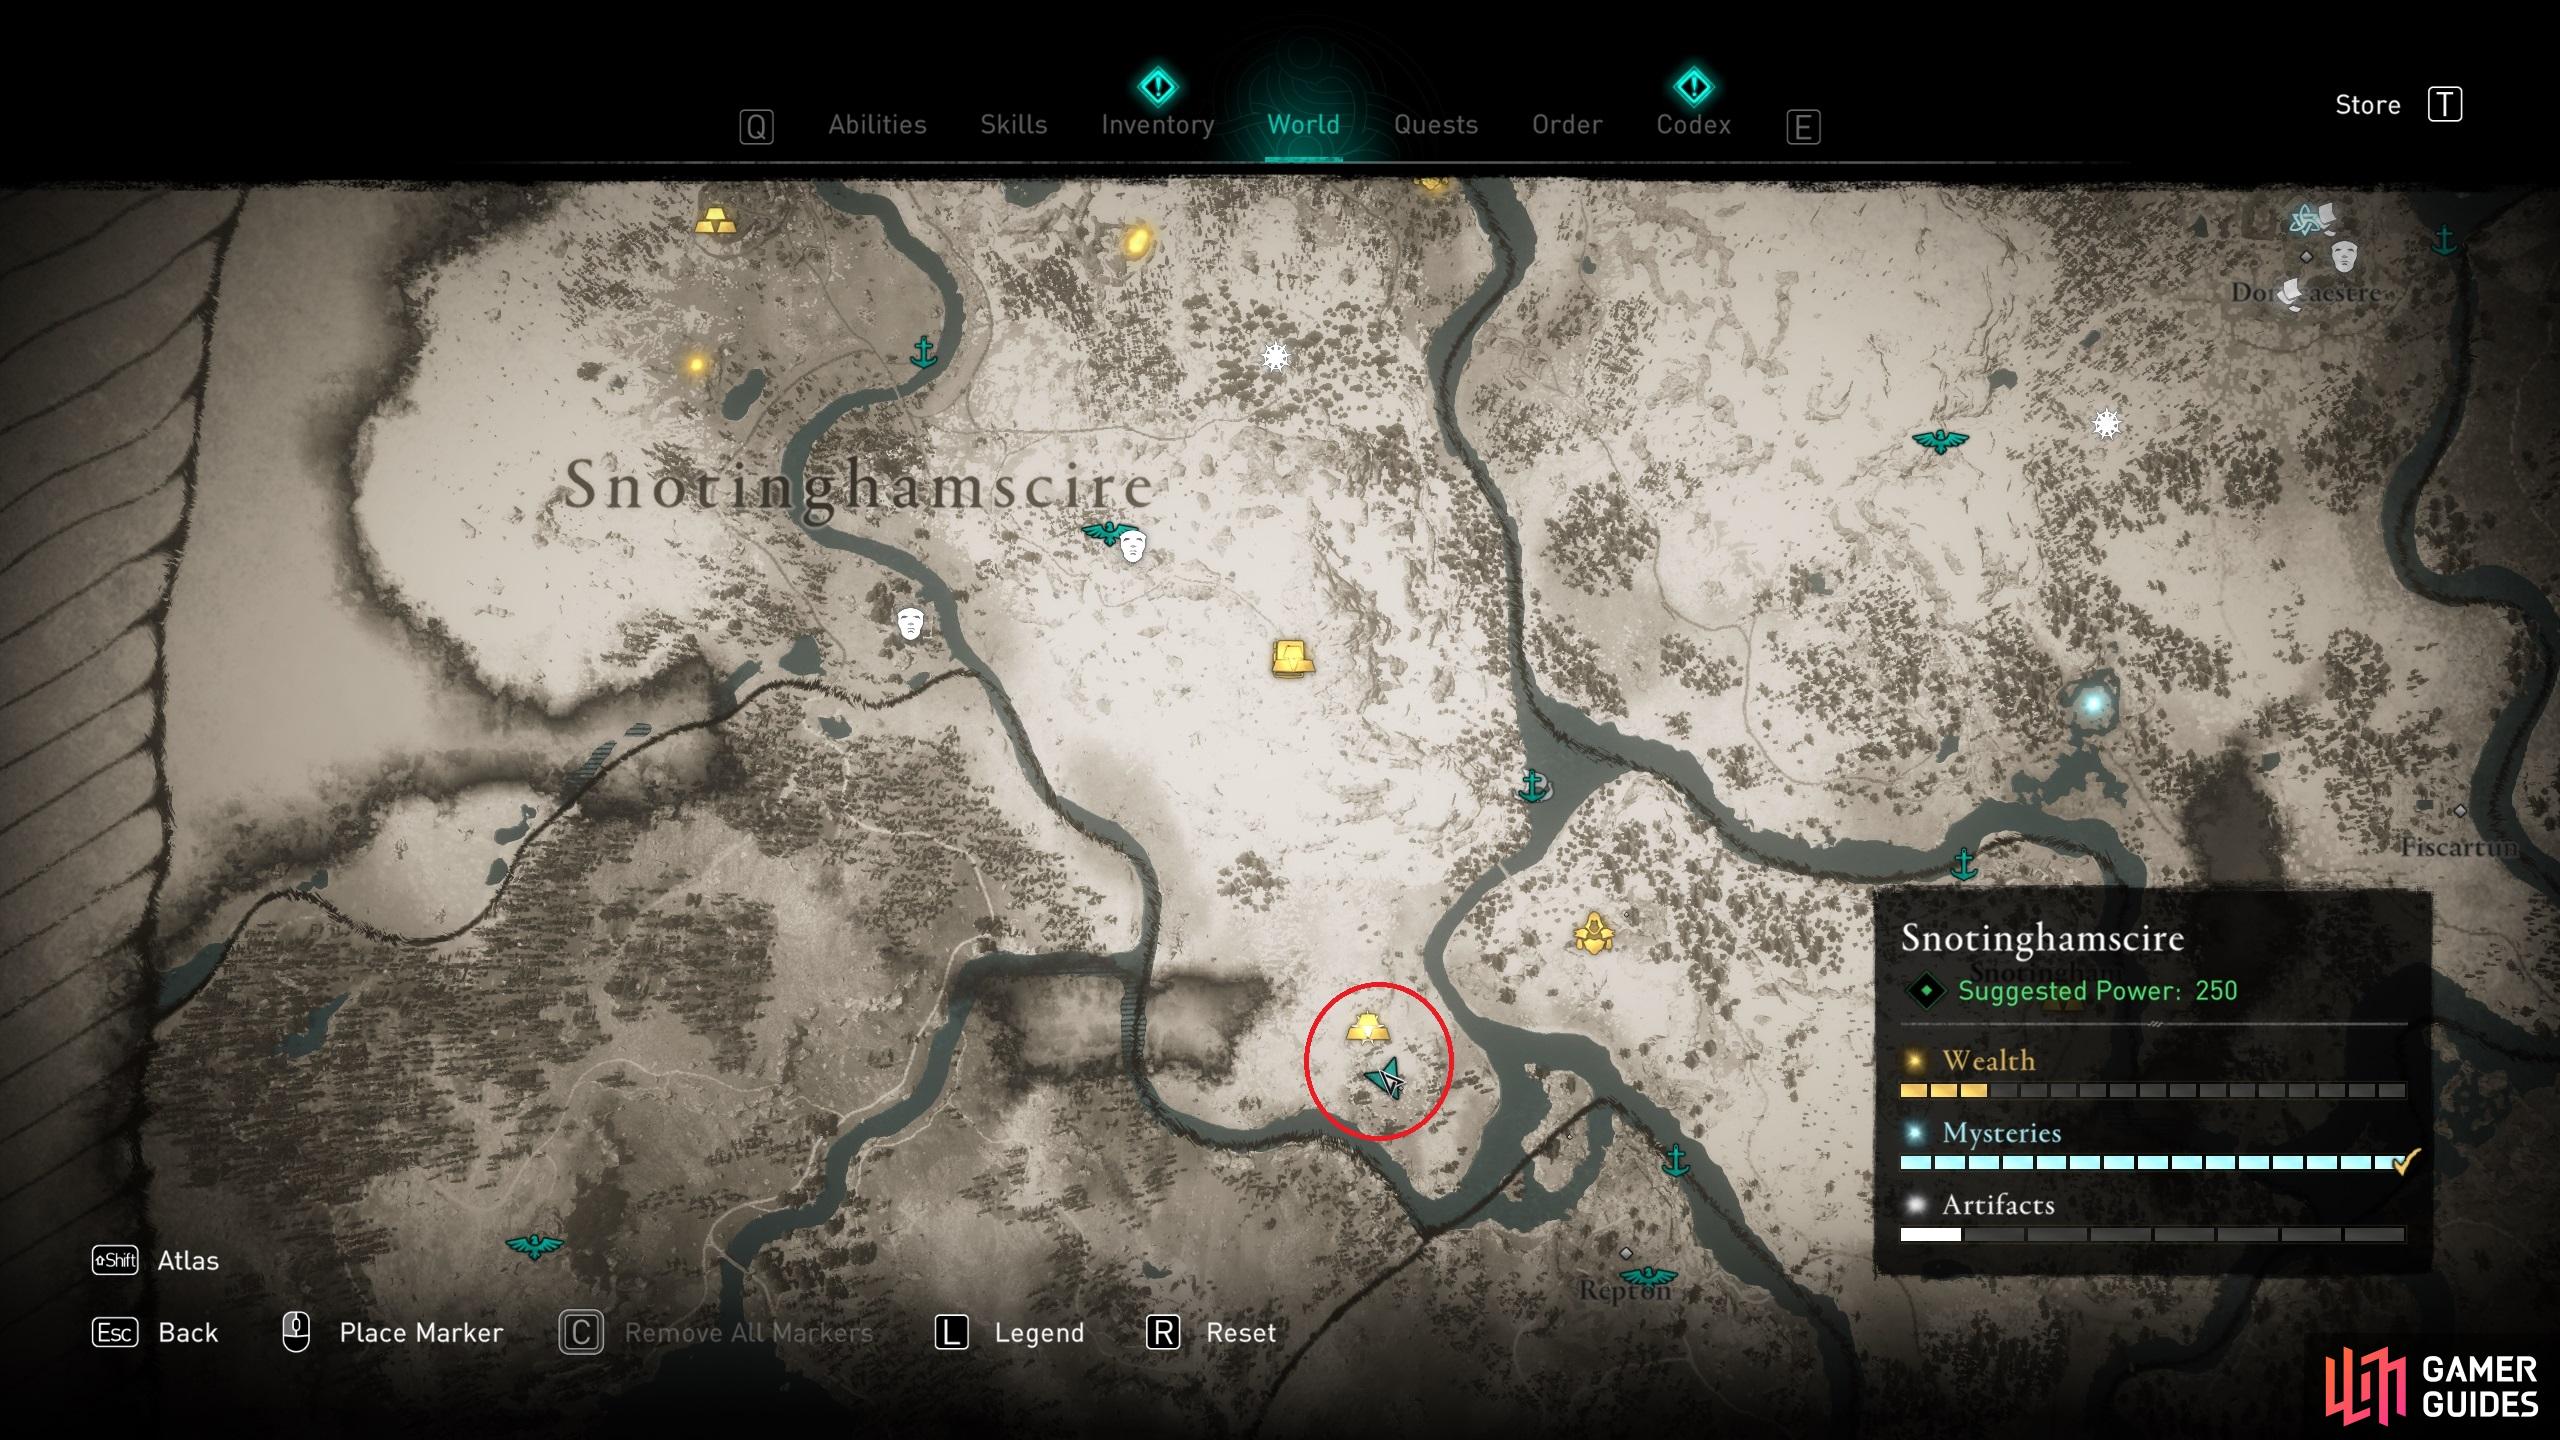 Assassin's Creed Valhalla: Full world map and treasure guide